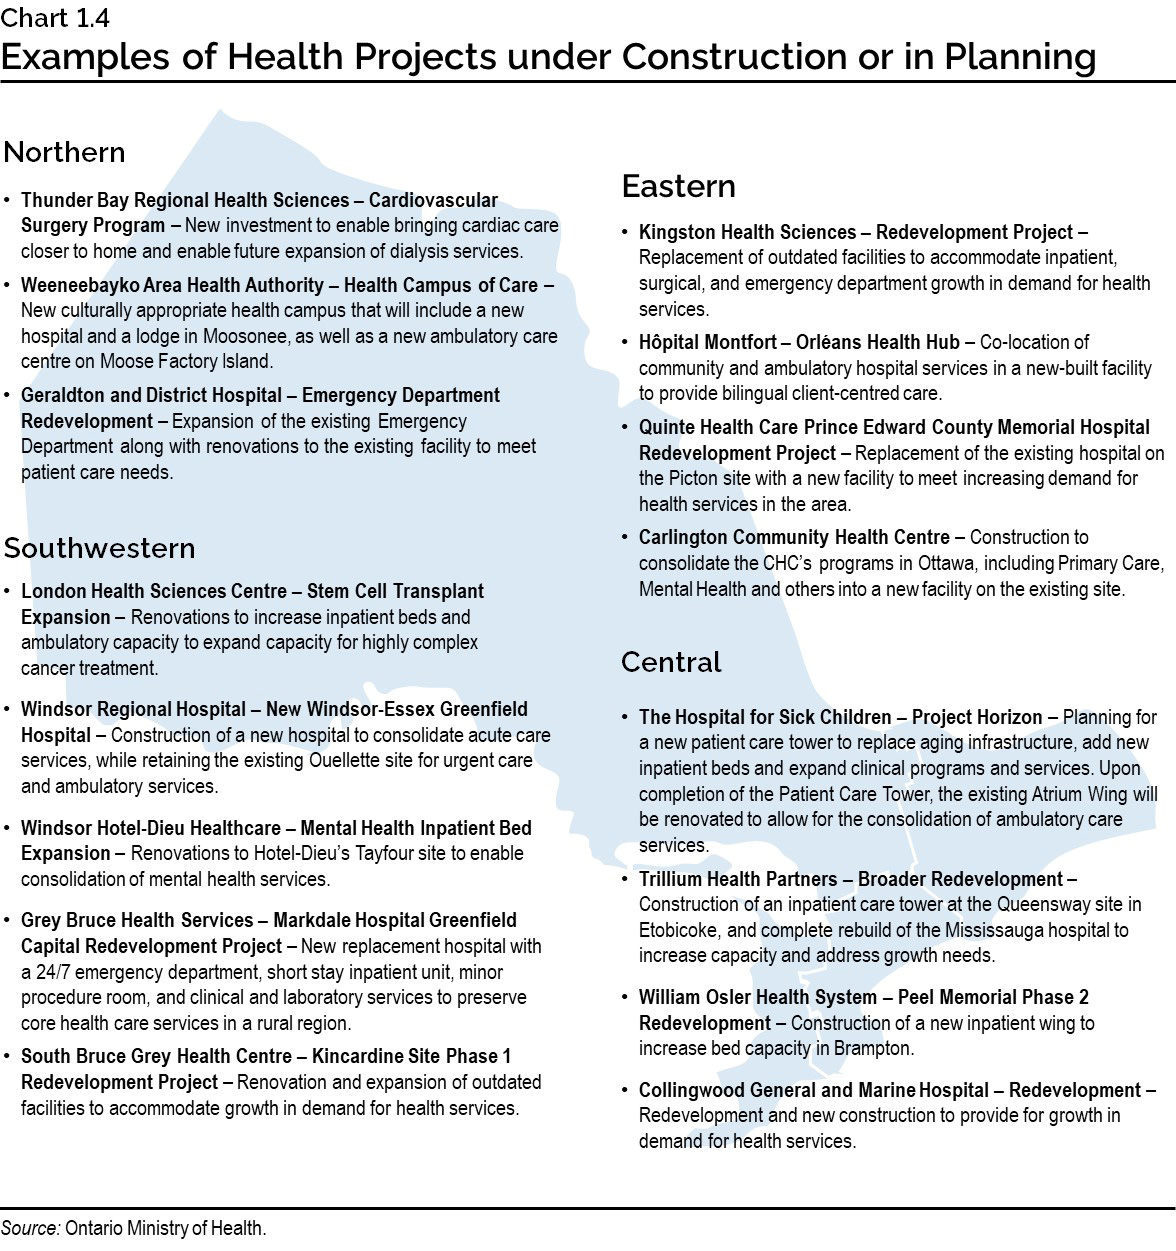 Chart 1.4: Examples of Health Projects under Construction or in Planning